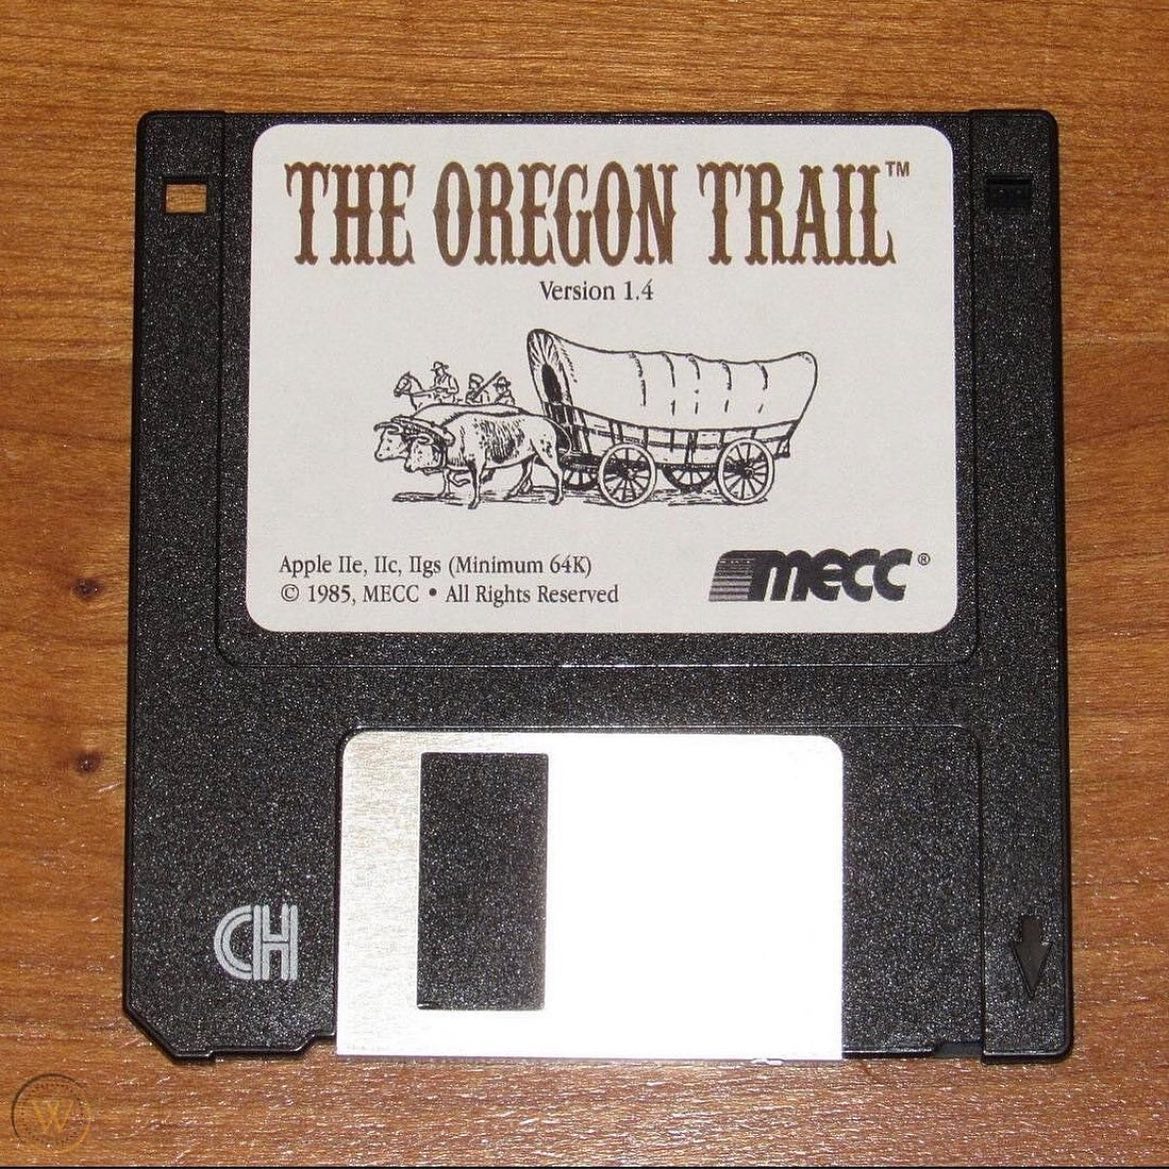 funny pics and randoms - oregon trail game disk - G The Oregon Trail Version 1.4 Apple Ile, IIc, Ilgs Minimum 64K 1985, Mecc. All Rights Reserved Ch mecc